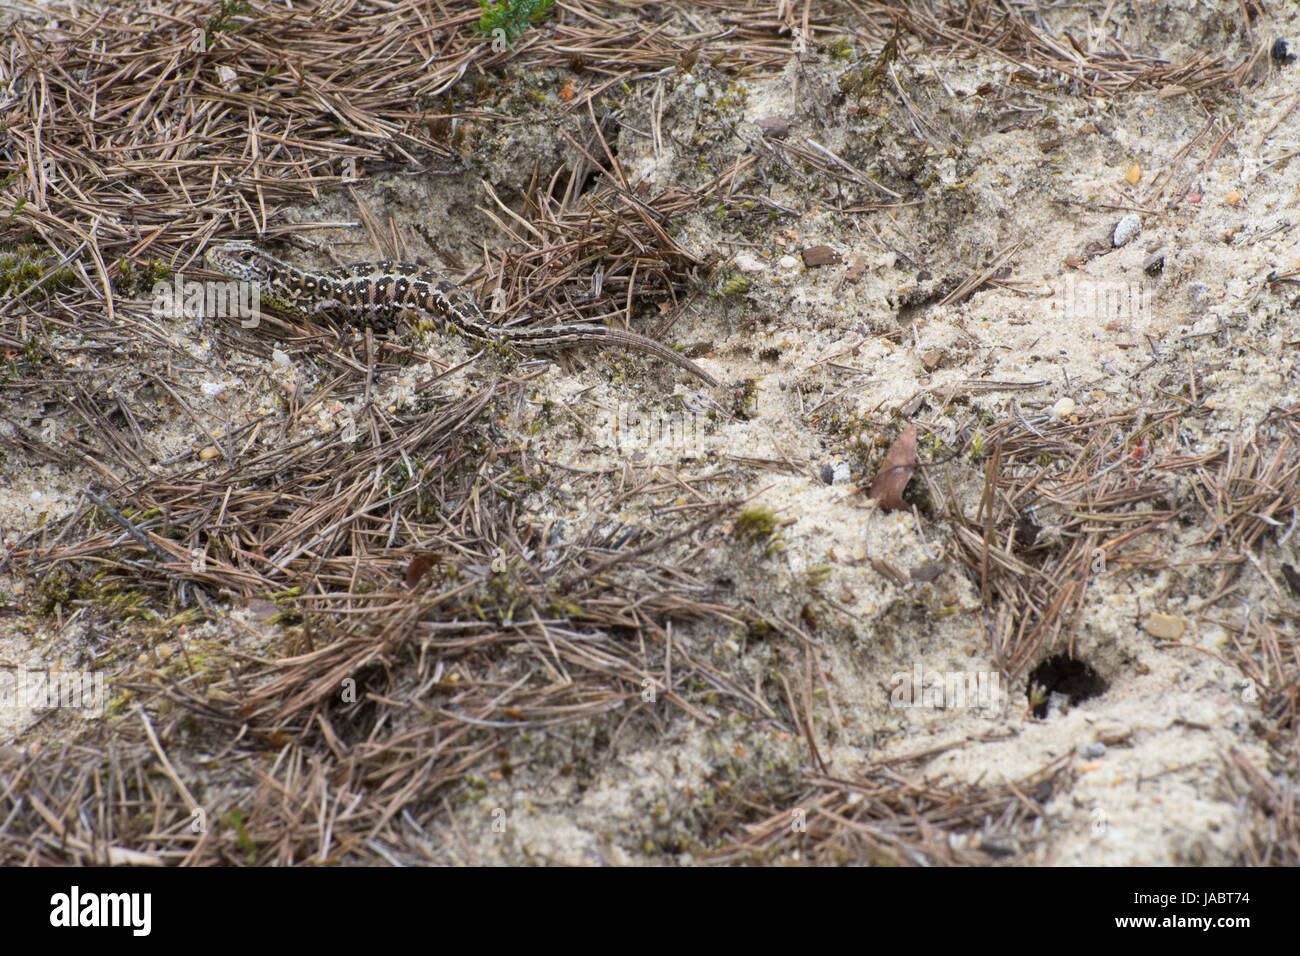 Gravid female sand lizard (Lacerta agilis) close to her egg-laying burrow in the sand Stock Photo